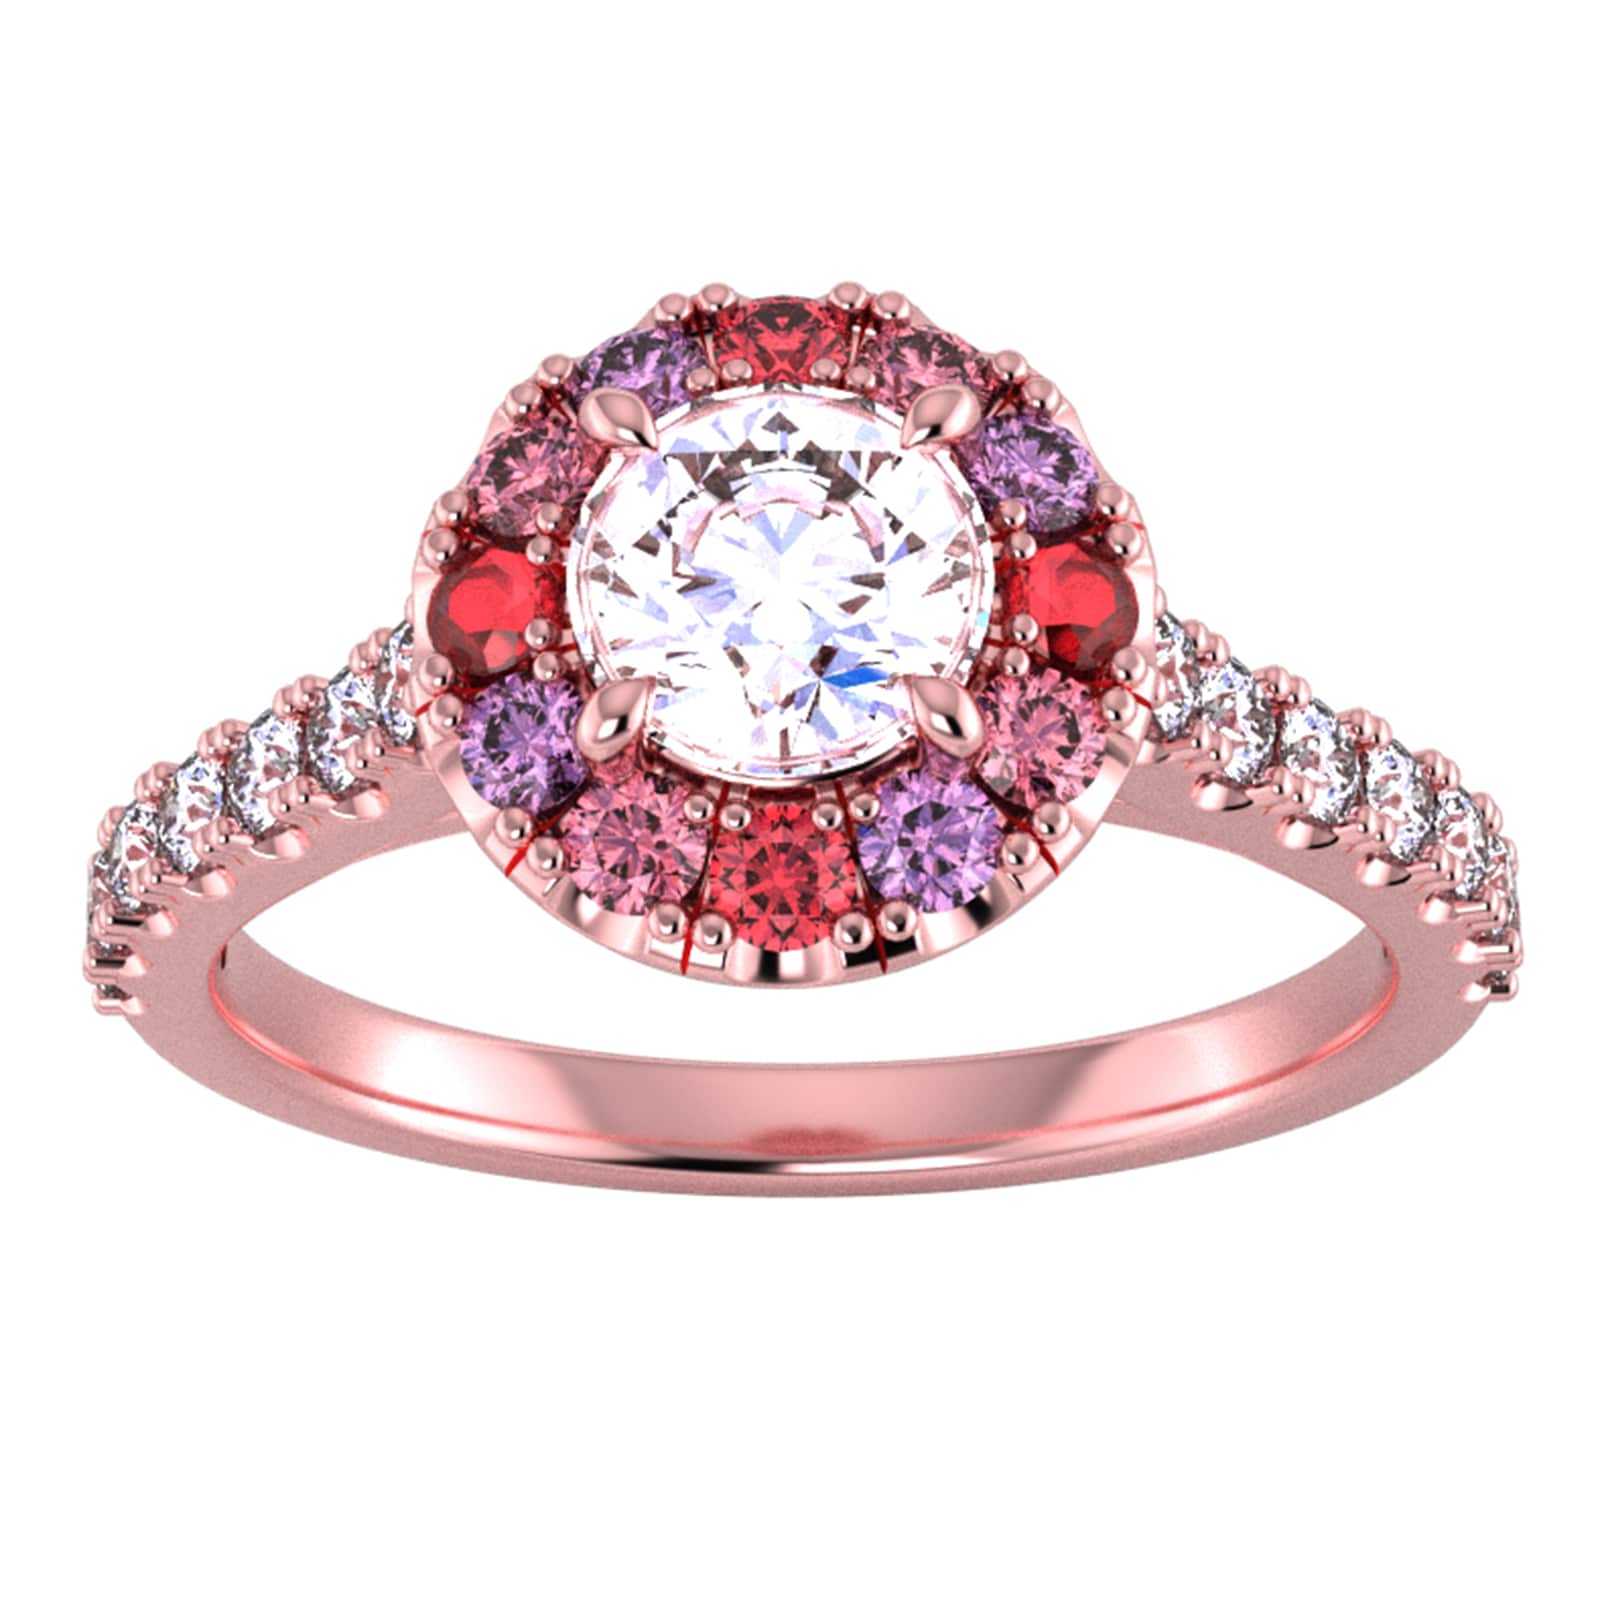 18ct Rose Gold Diamond & Pink, Red, Purple Sapphire Halo Ring - Ring Size Q